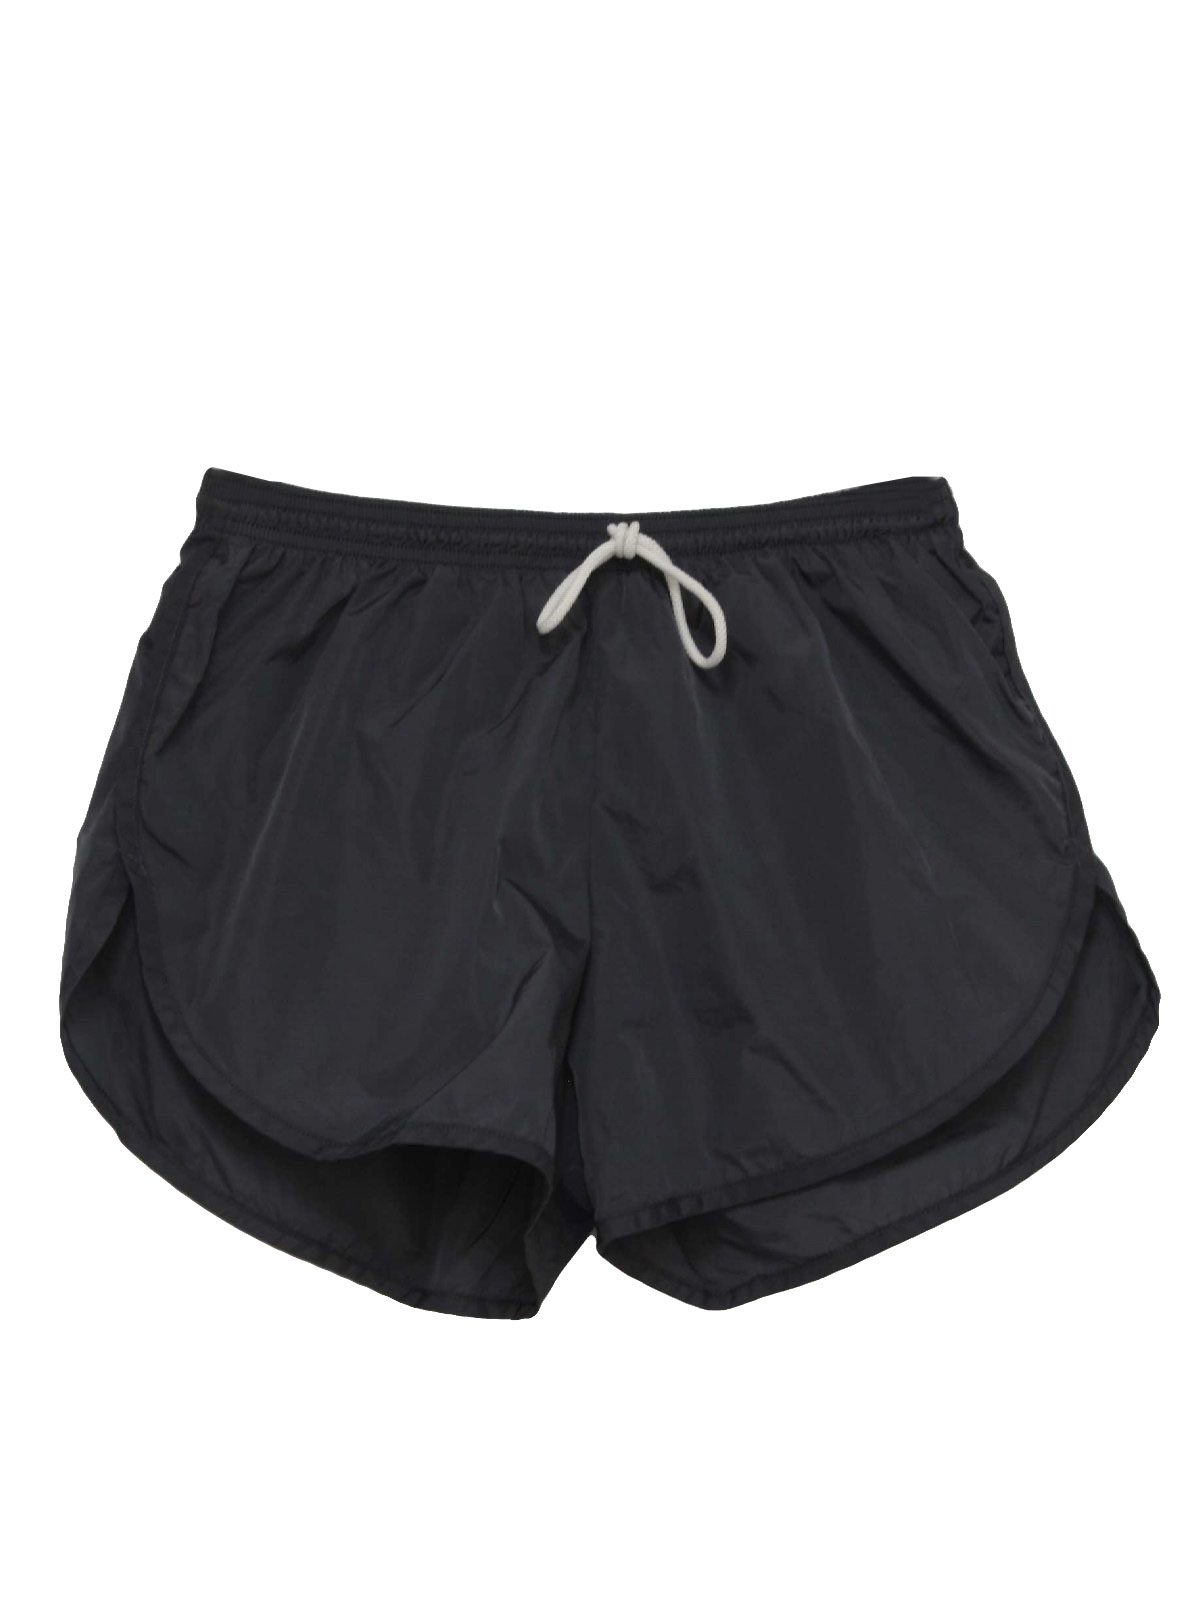 1990's Shorts: 90s -no label- Unisex charcoal nylon with cotton lining ...